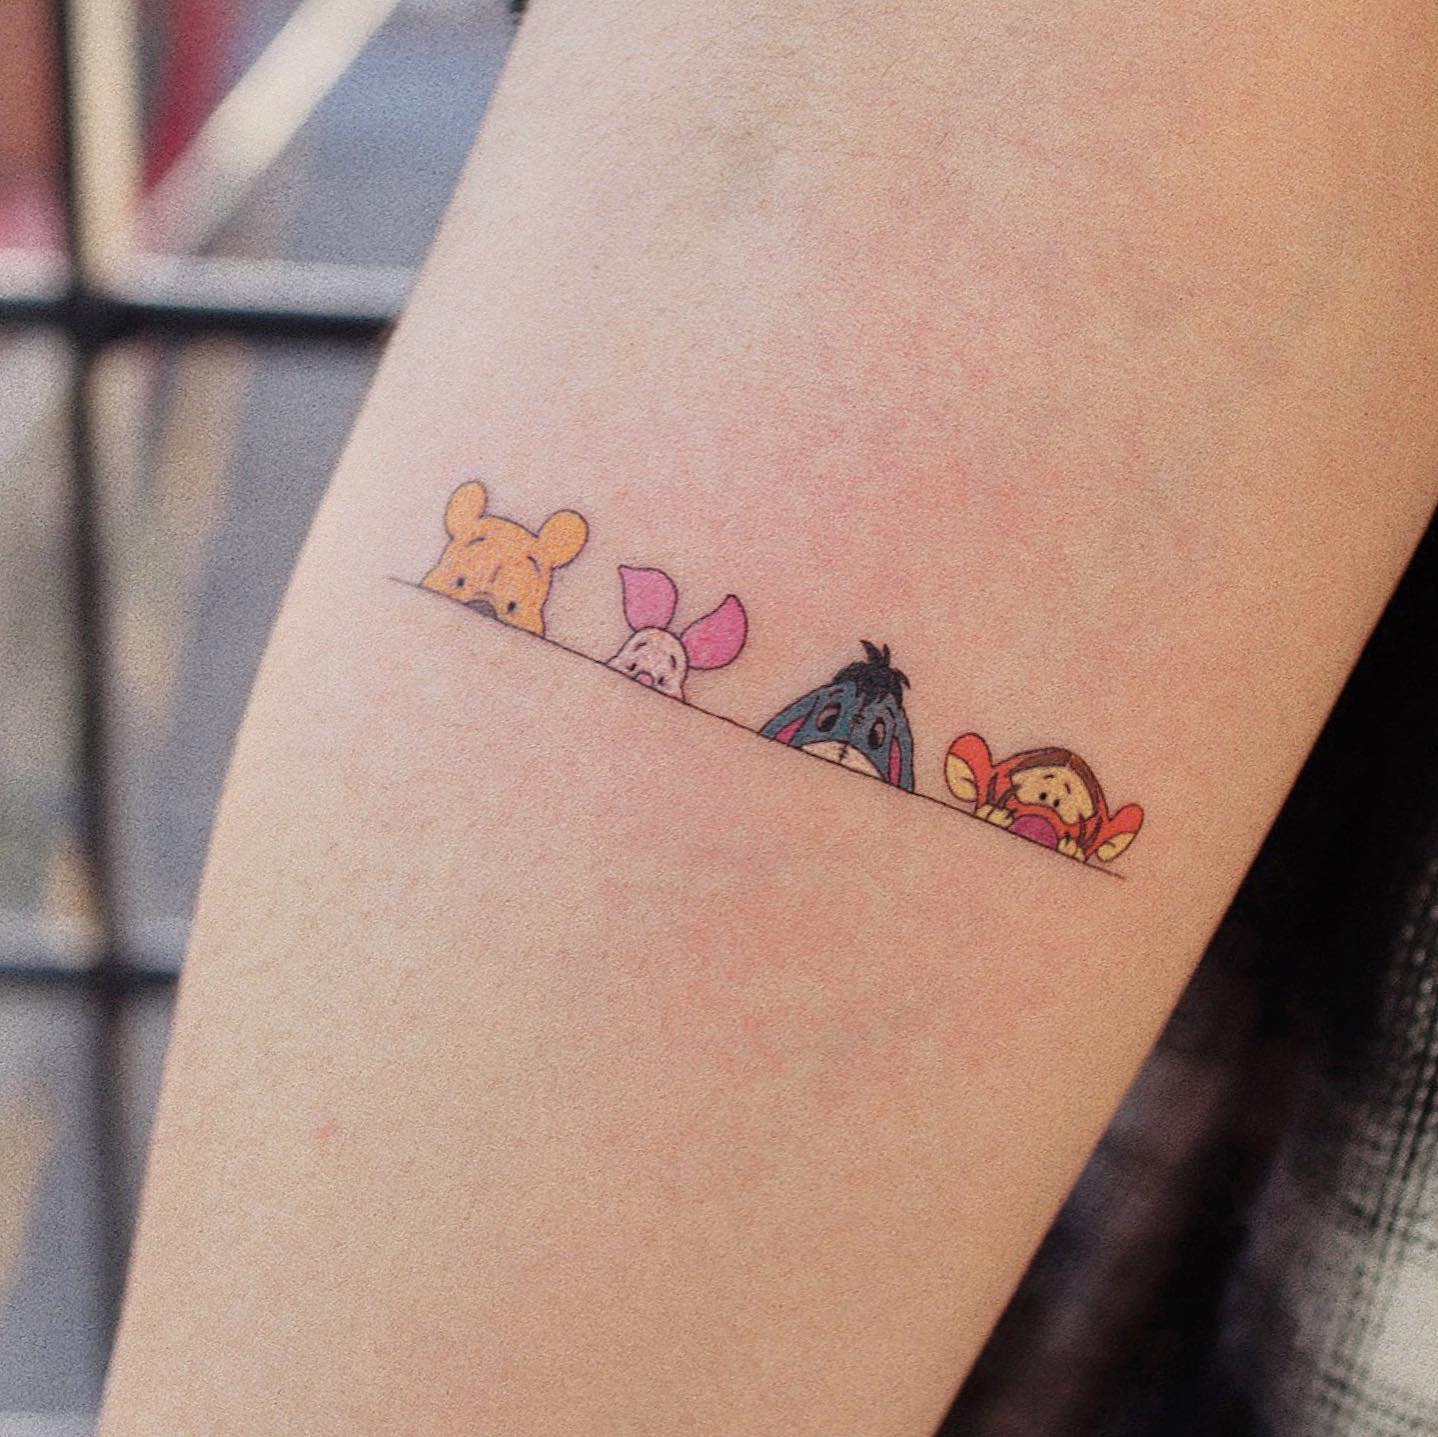 15 Pair Tattoos To Get With Your Bestie To Prove Youre BFF Goals   Society19